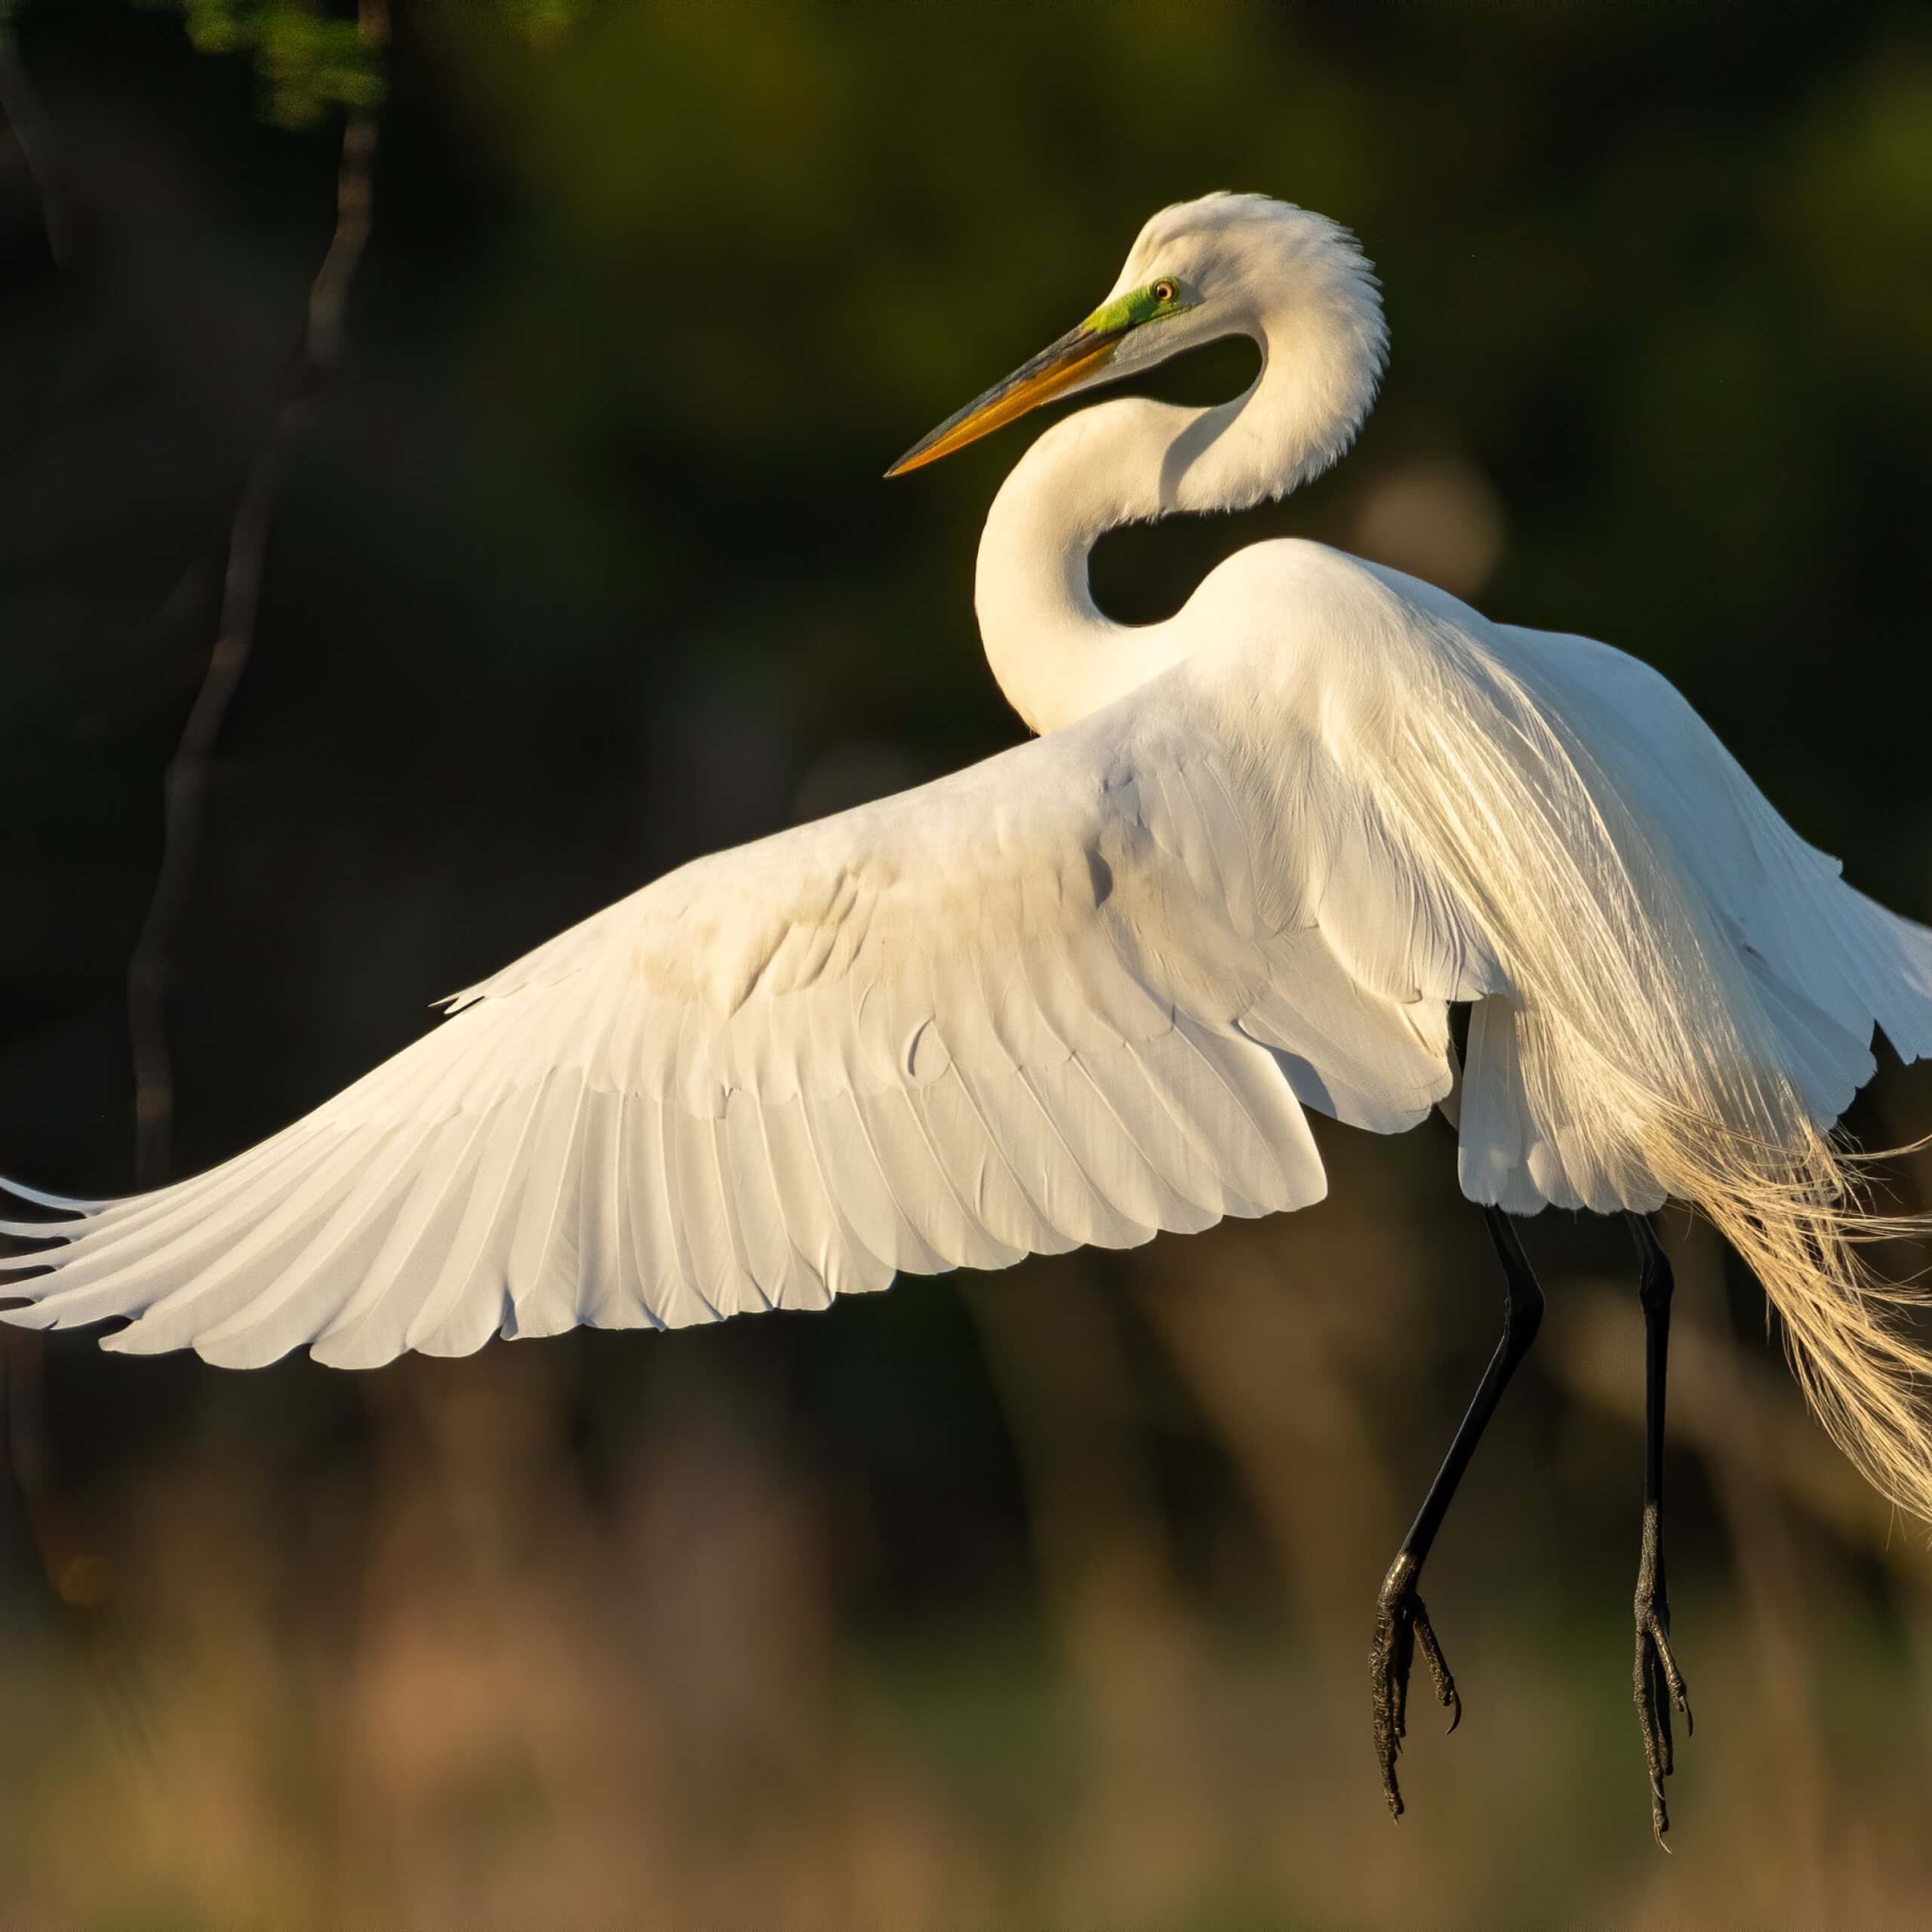 Is that a heron or an egret? Our guide to the region's white birds can help